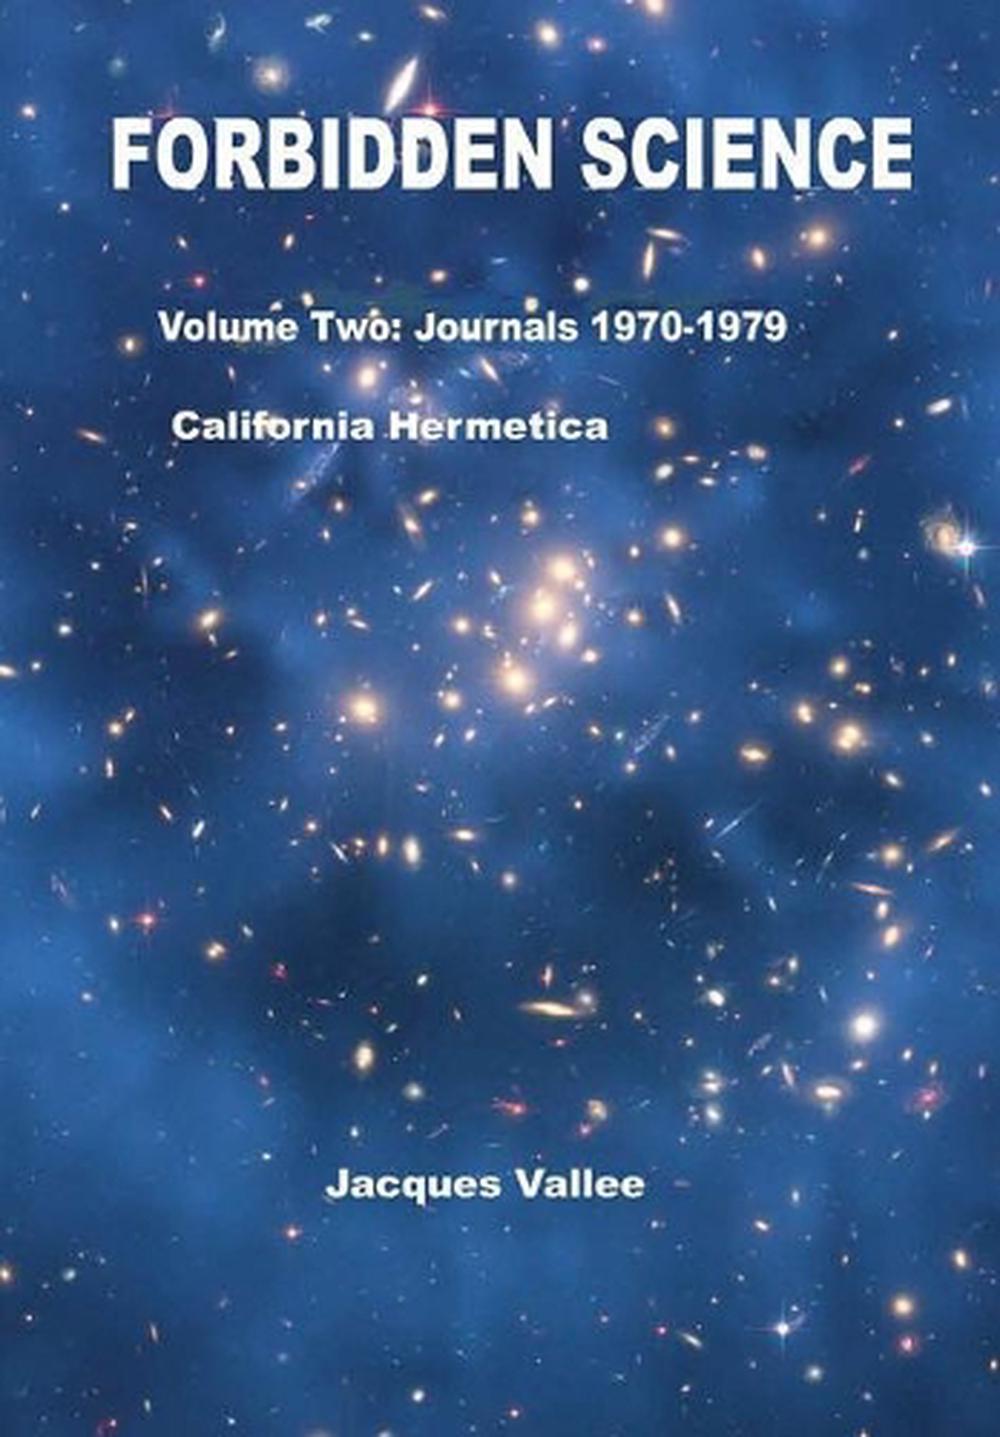 Forbidden Science Volume Two Revised By Jacques Vallee English